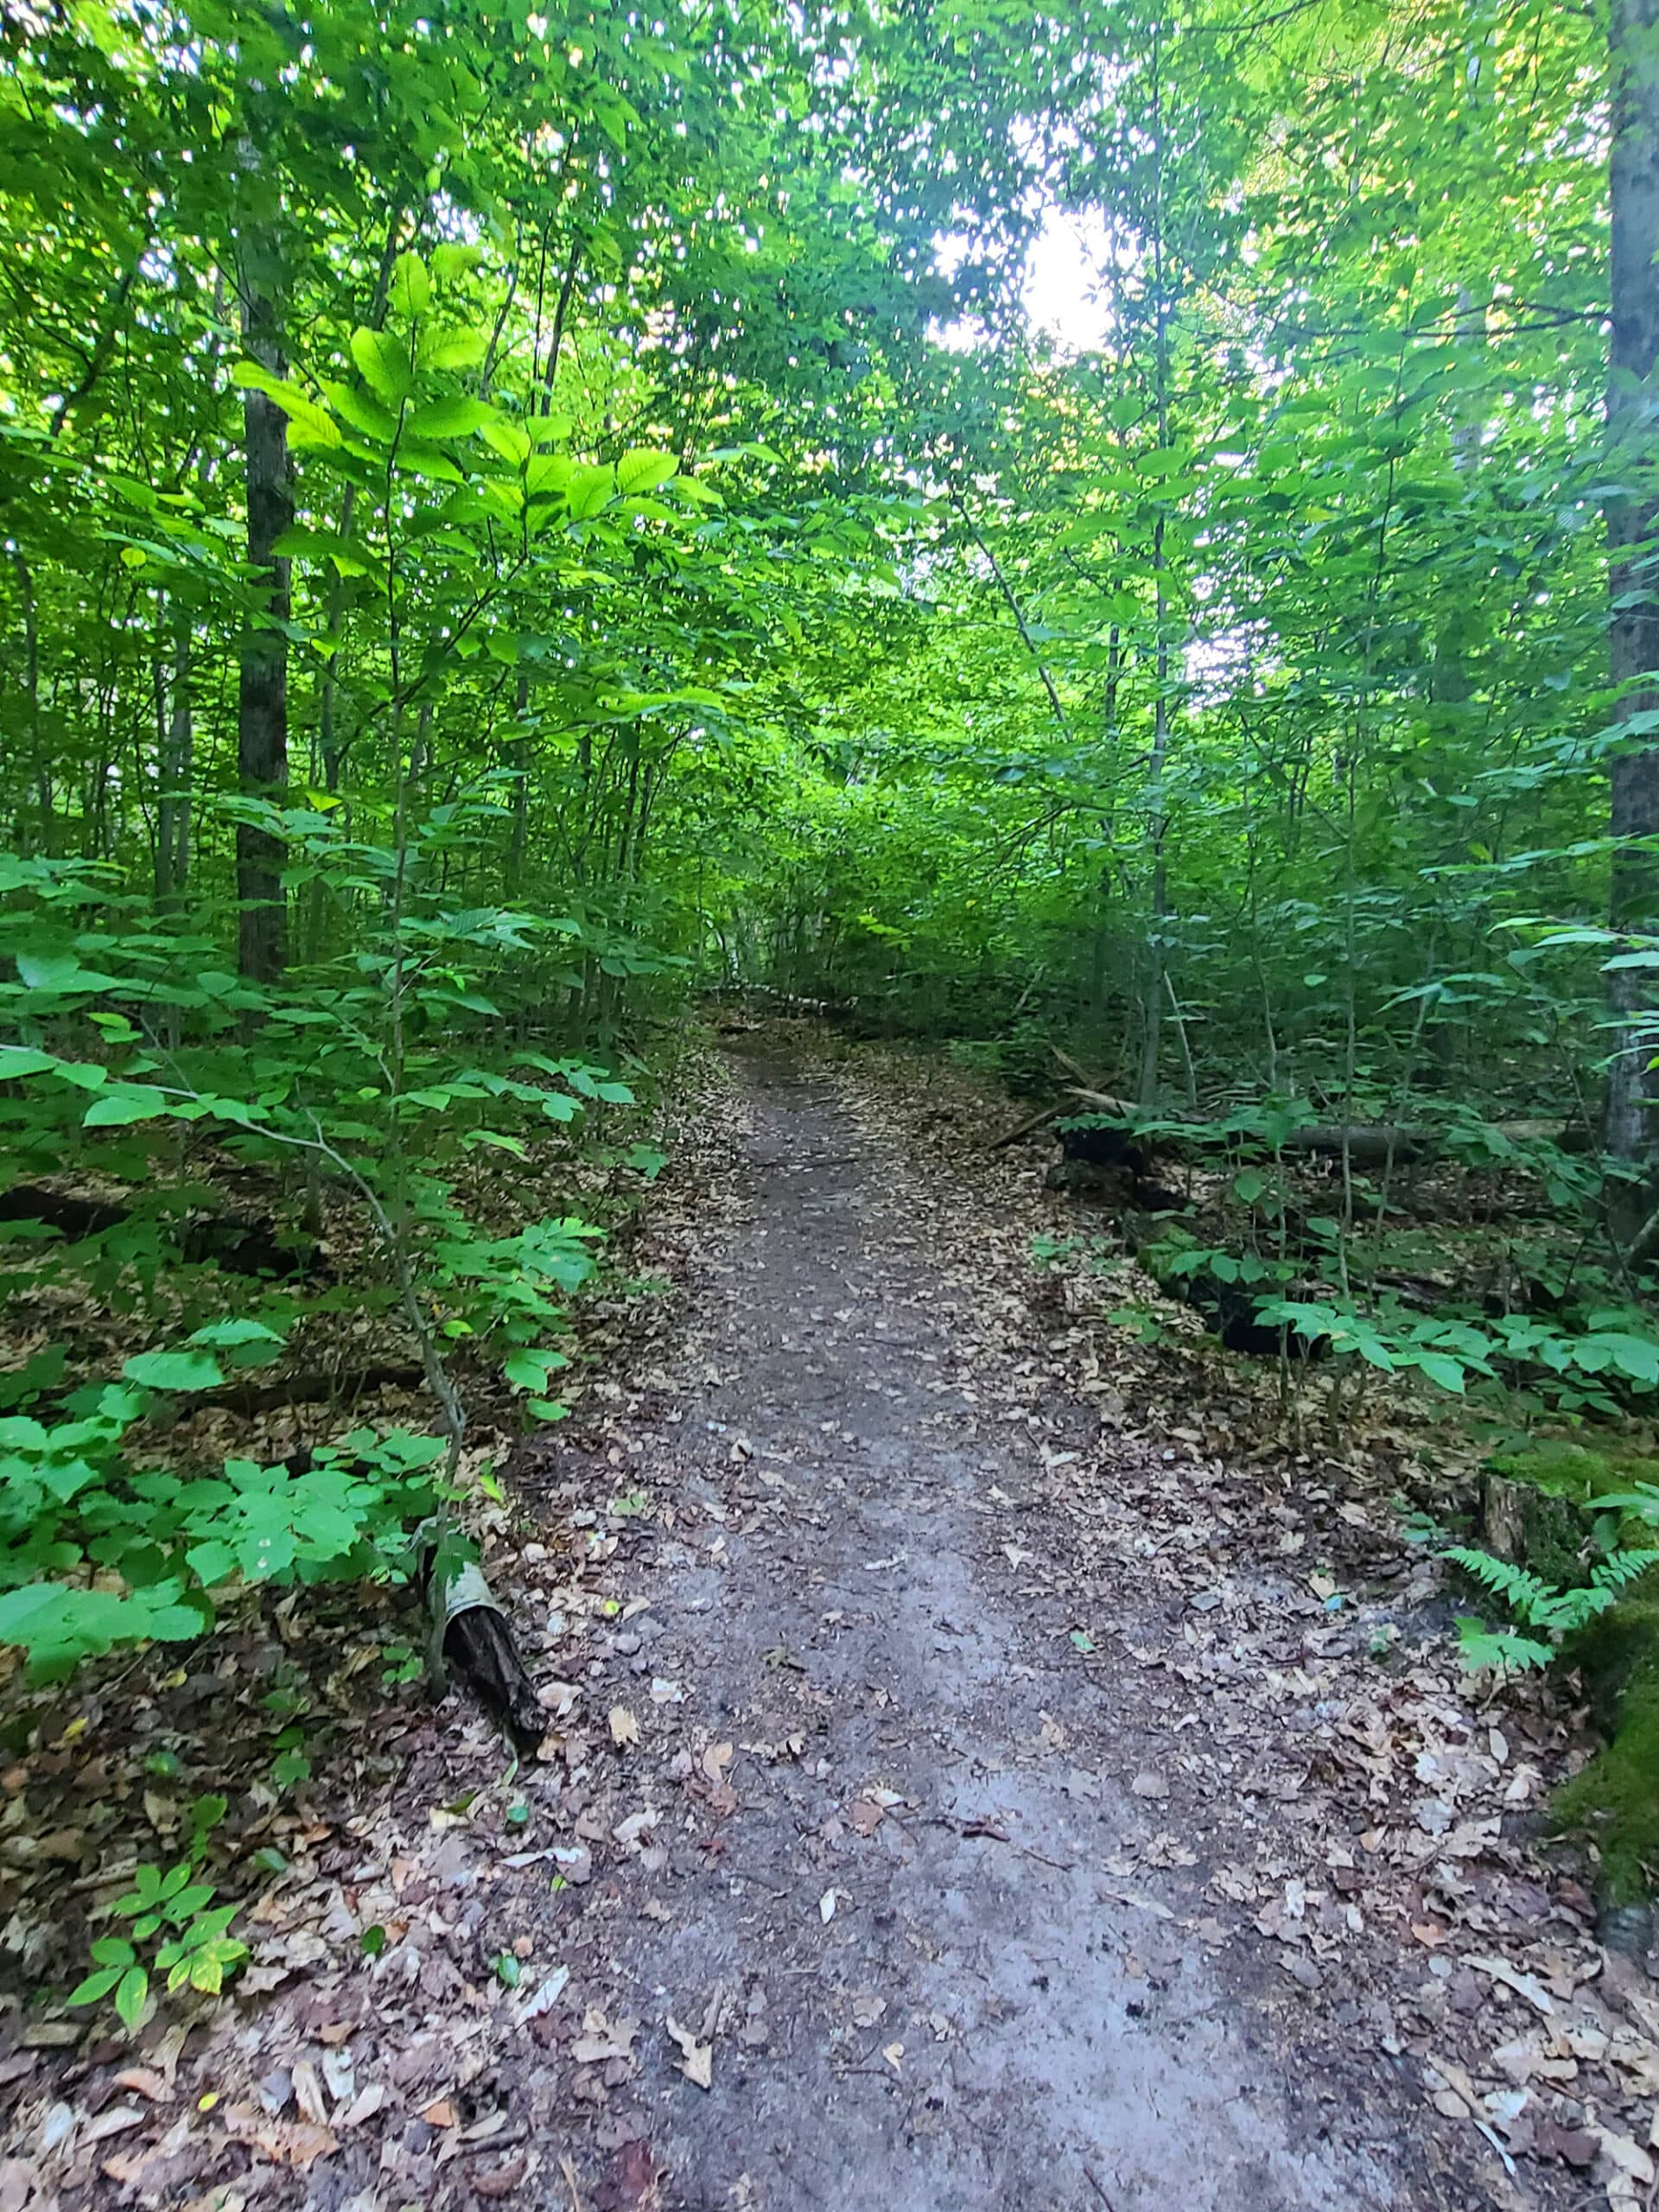 A mostly flat, clear trail surrounded by tall trees.